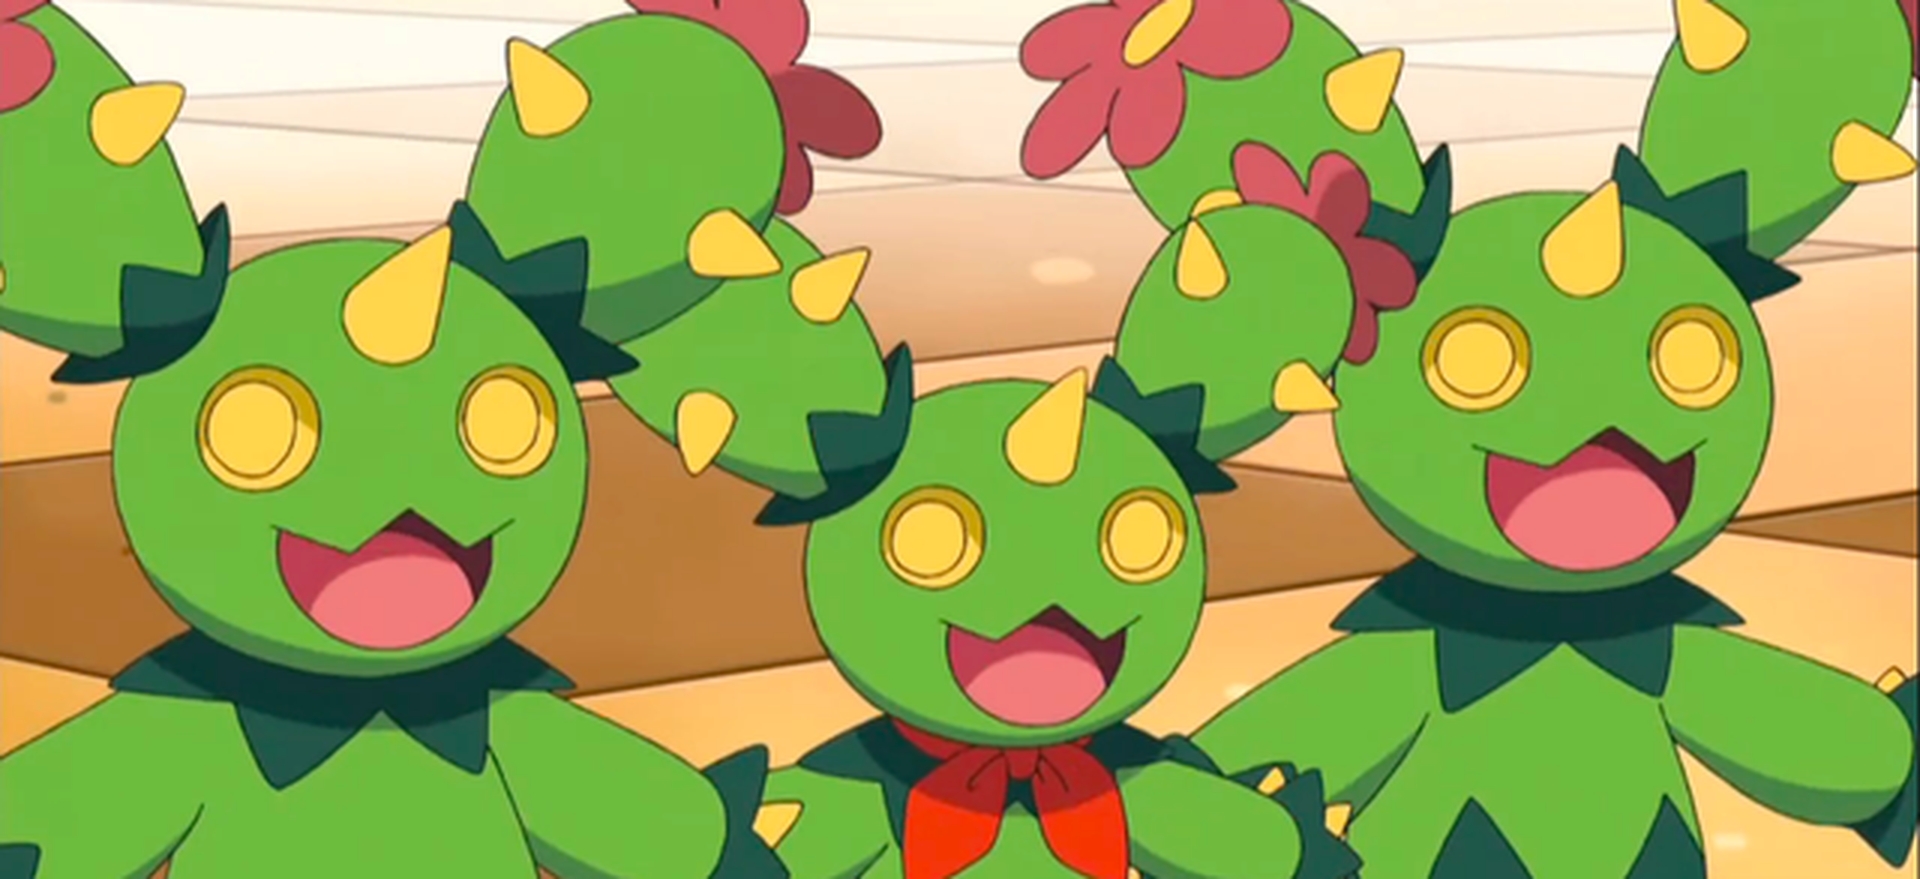 Pokemon GO players are always after new and unique Pokemons to add to their collection, and today we're covering how to get Maractus in Pokemon GO.